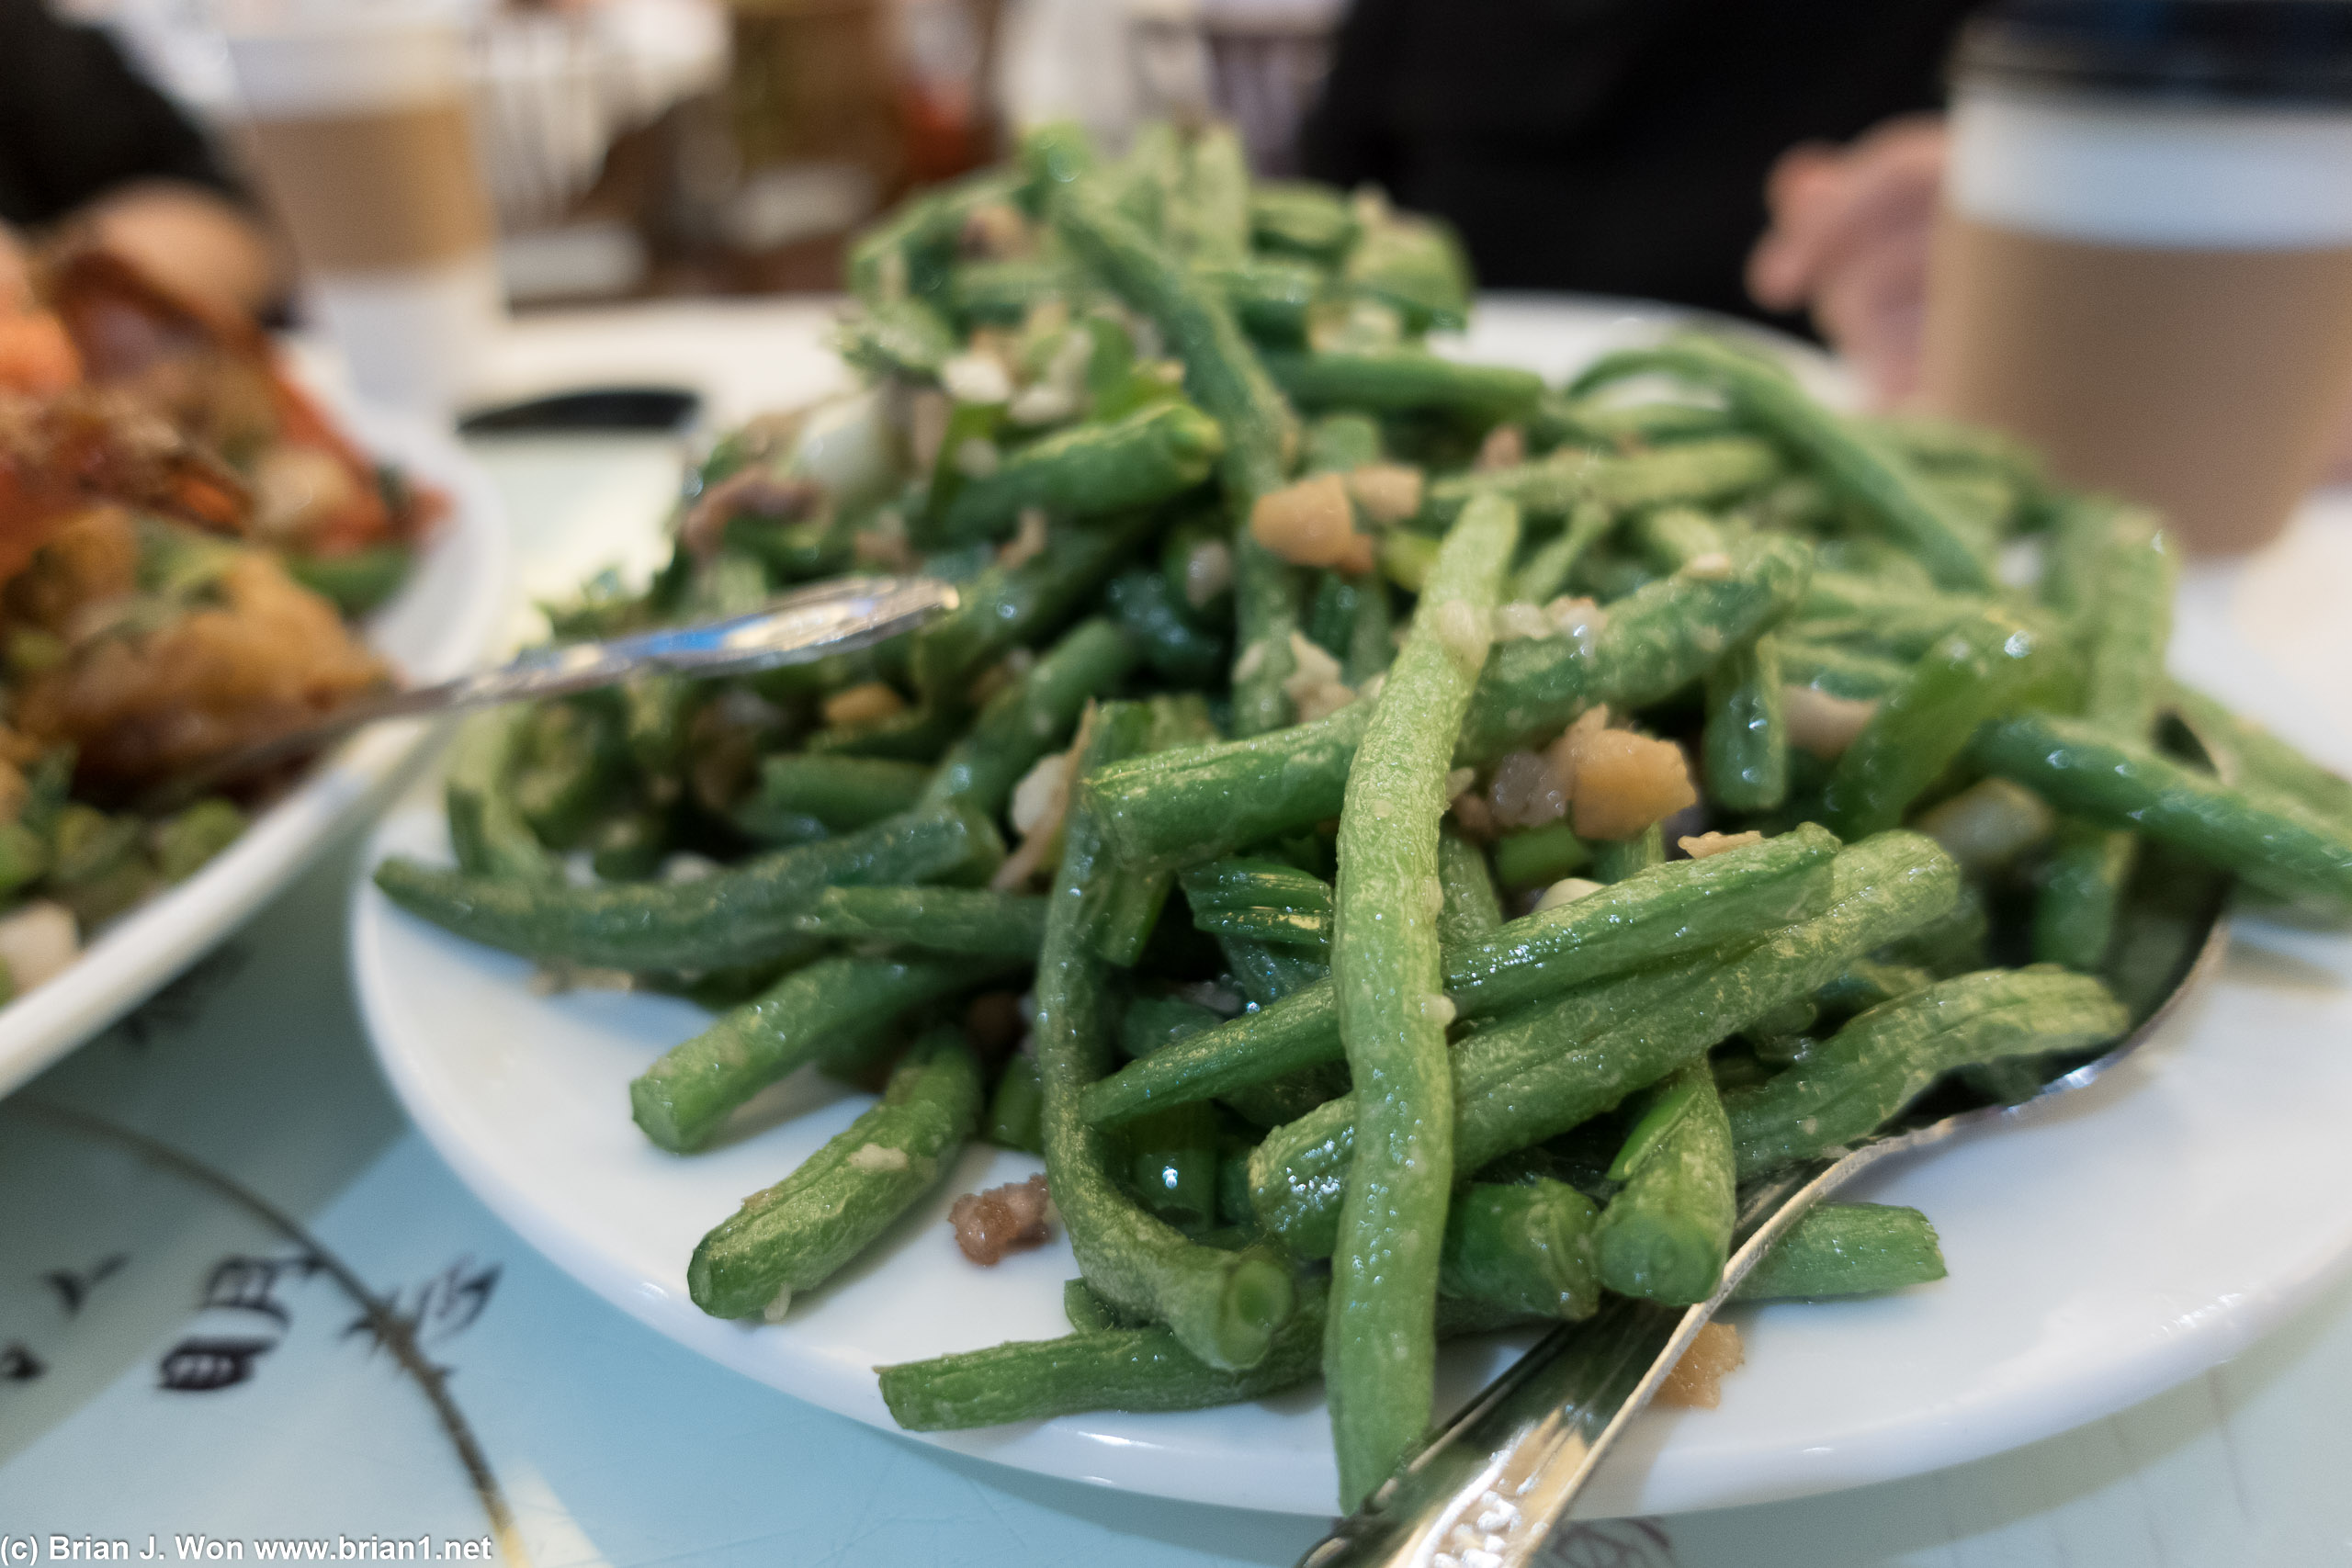 String beans with dried fish. Quite good.